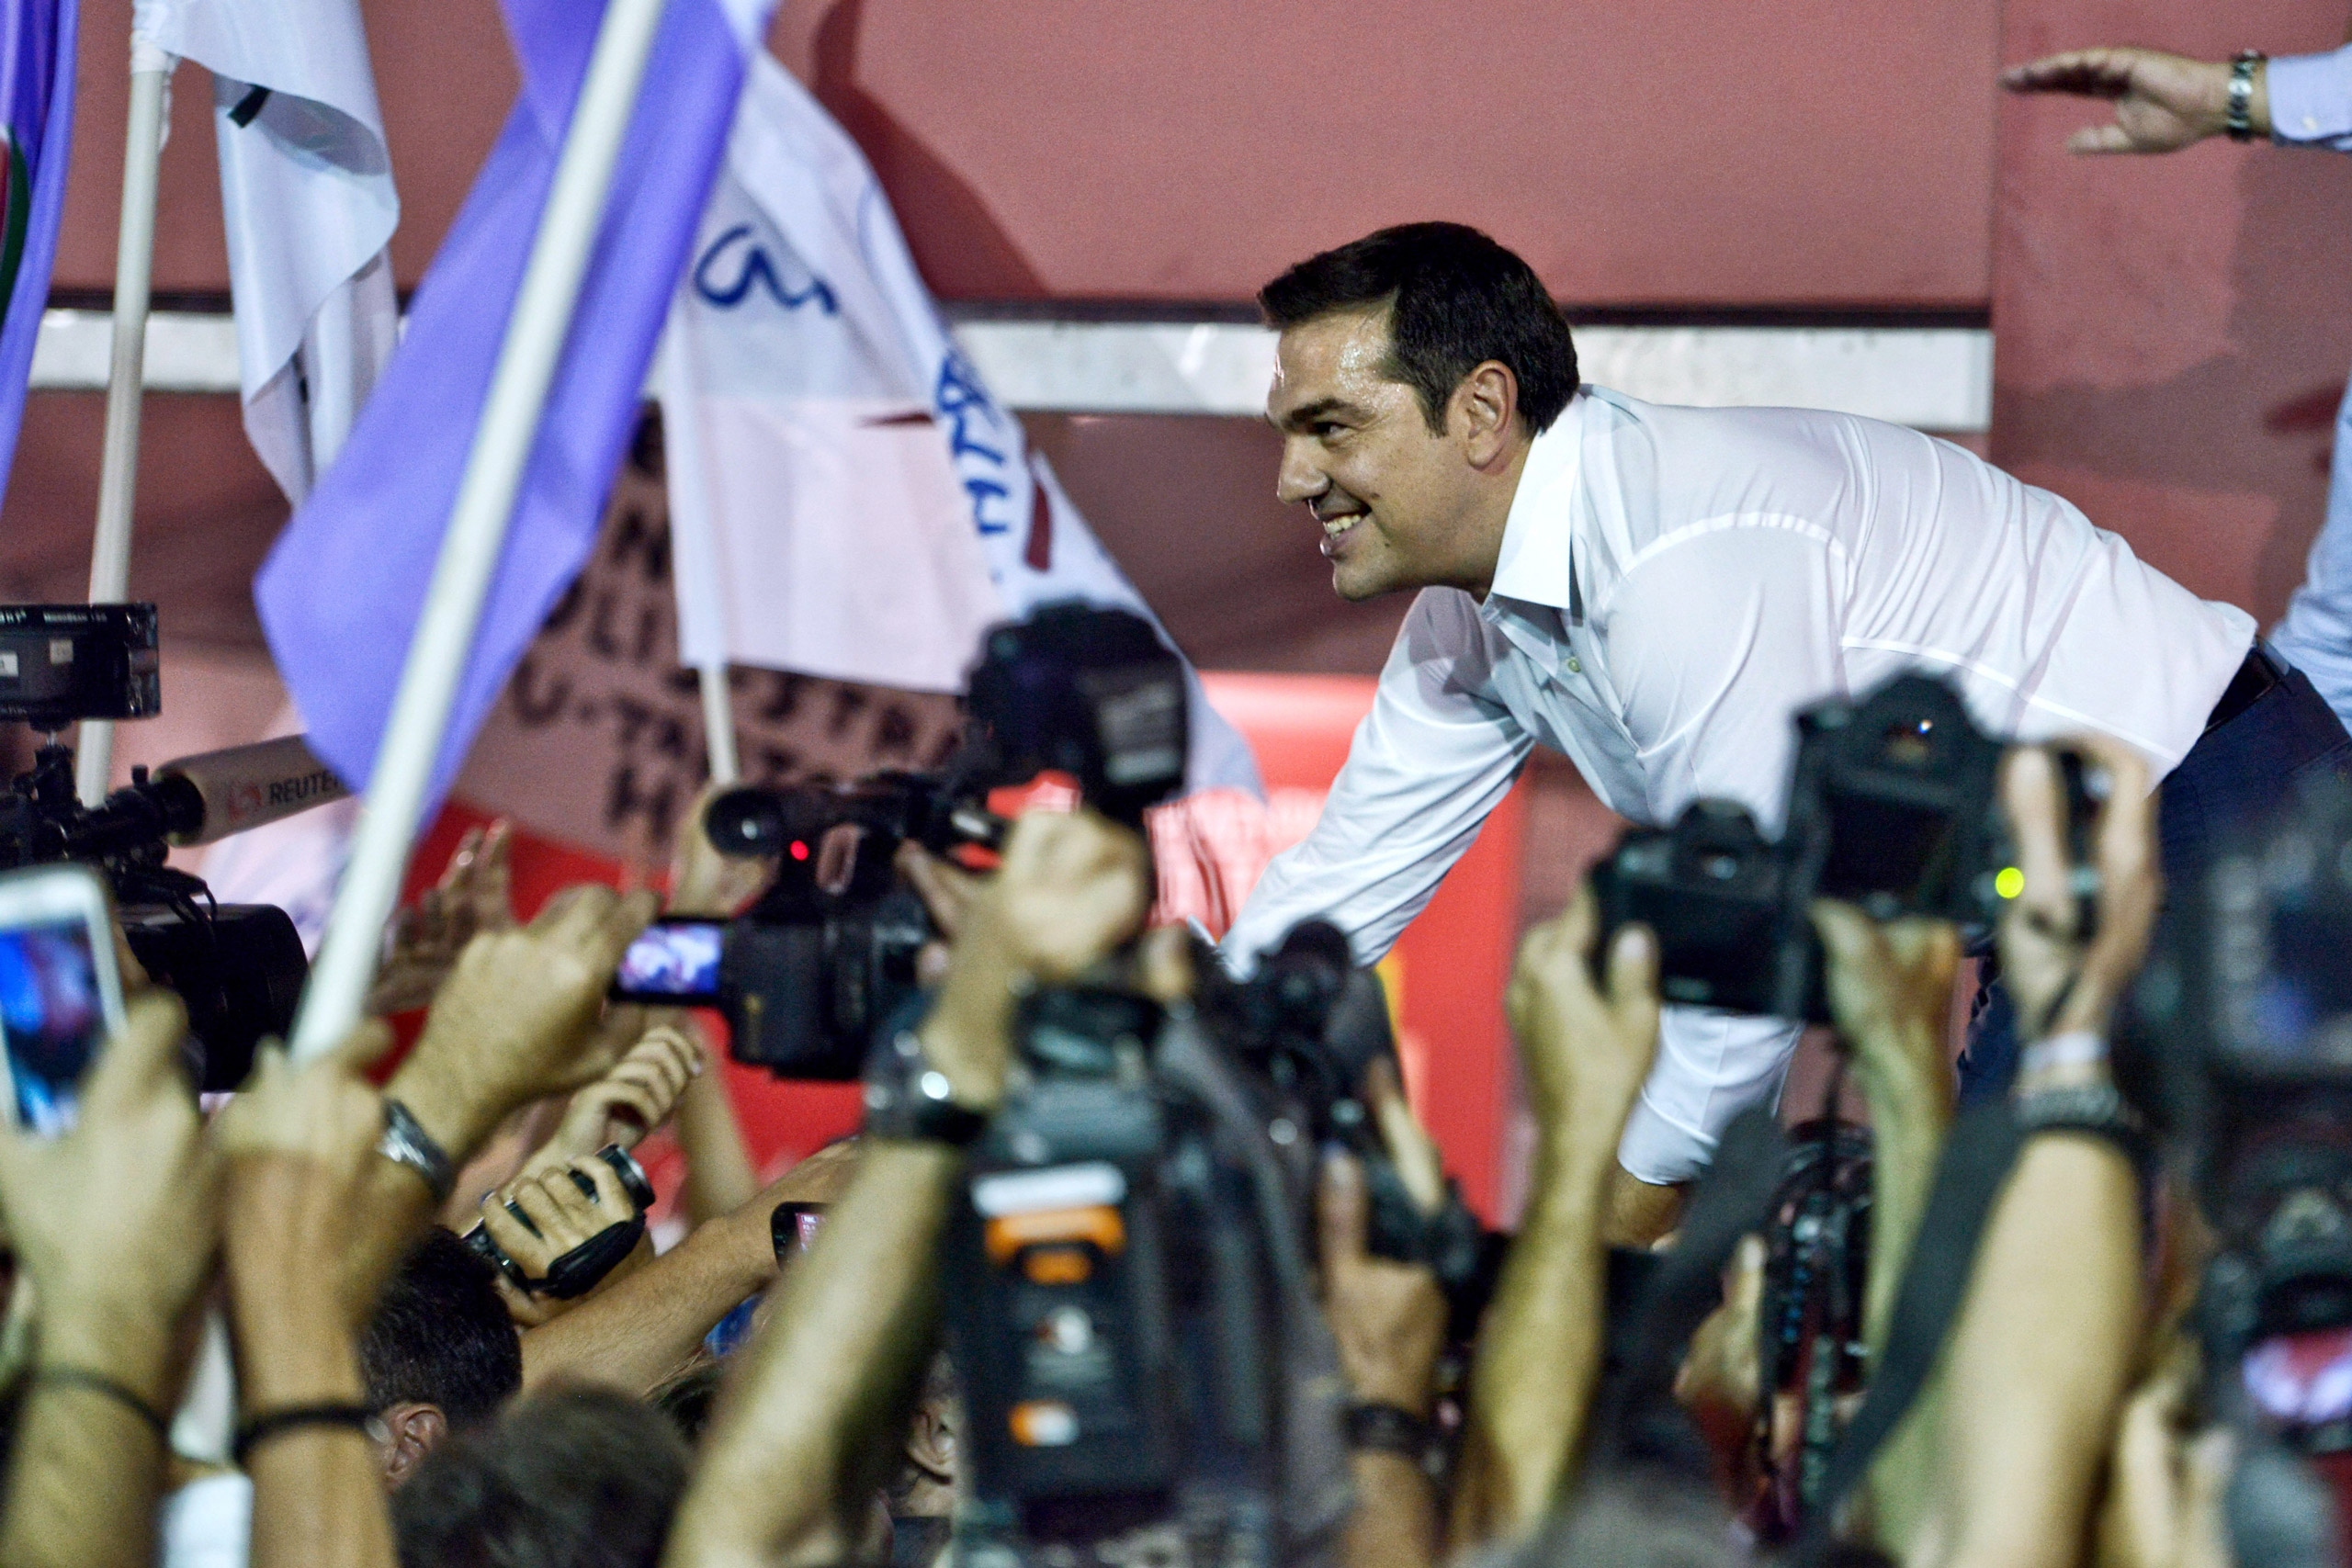 ATHENS, GREECE - SEPTEMBER 20:  Former Greek prime minister and leader of leftist Syriza party Alexis Tsipras address supporters after winning the general election on September 20, 2015 in Athens, Greece. In Greece's fifth general election in six years, the latest polls give the incumbent Syriza party 35% of the vote compared with New Democracy's 28%.  The conservative New Democracy party earlier conceded defeat, leaving Syriza to form a coalition government with the Independent Greeks party.  (Photo by Milos Bicanski/Getty Images)